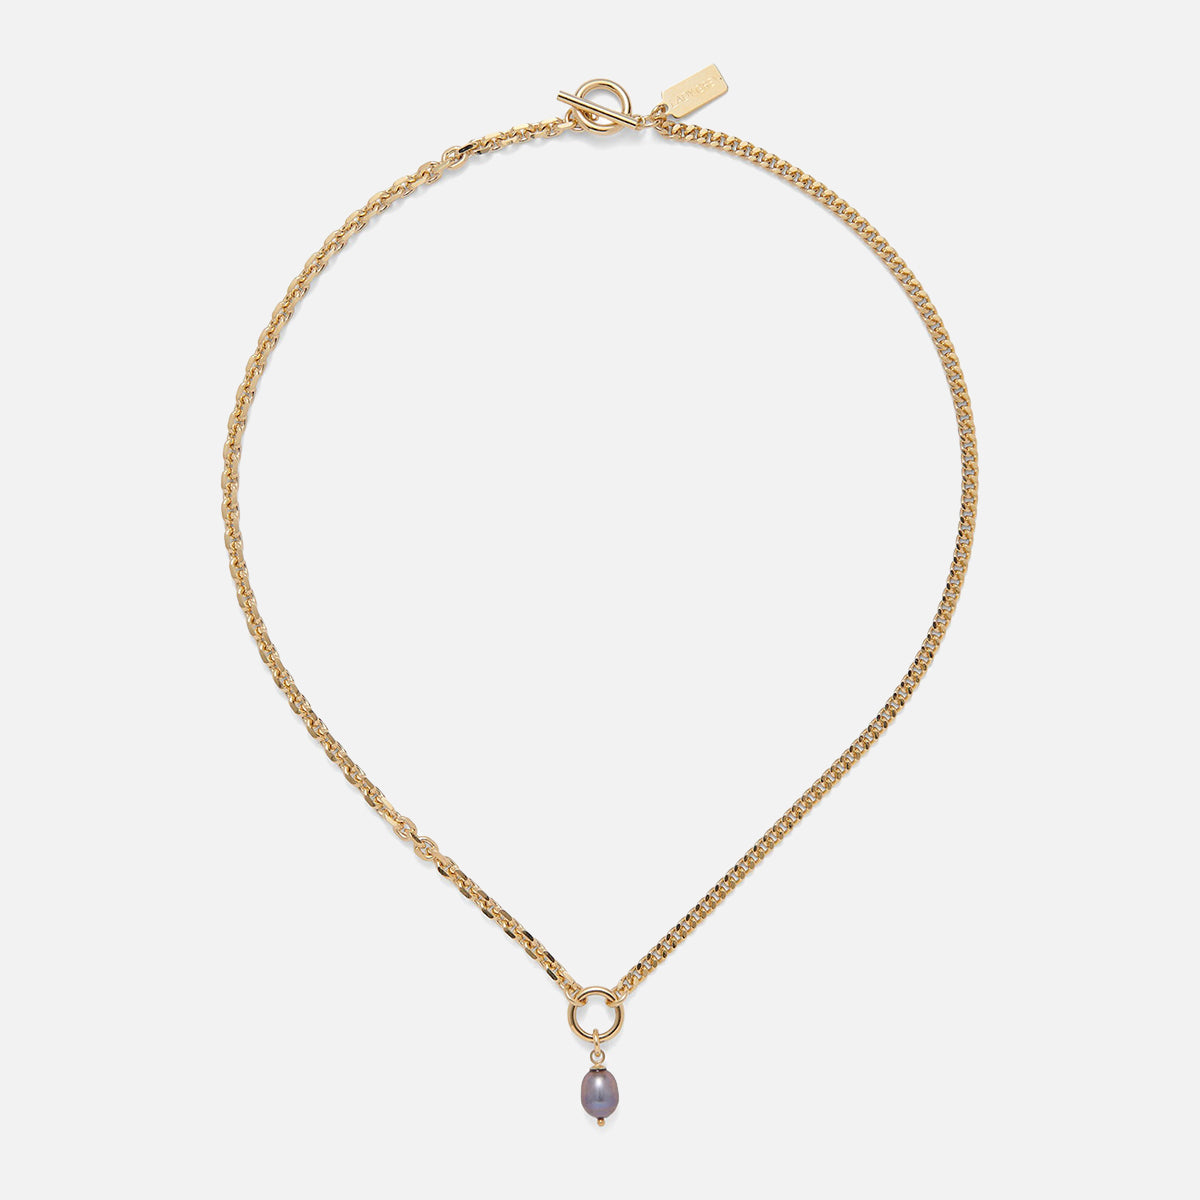 Duo Chain Necklace in Gold